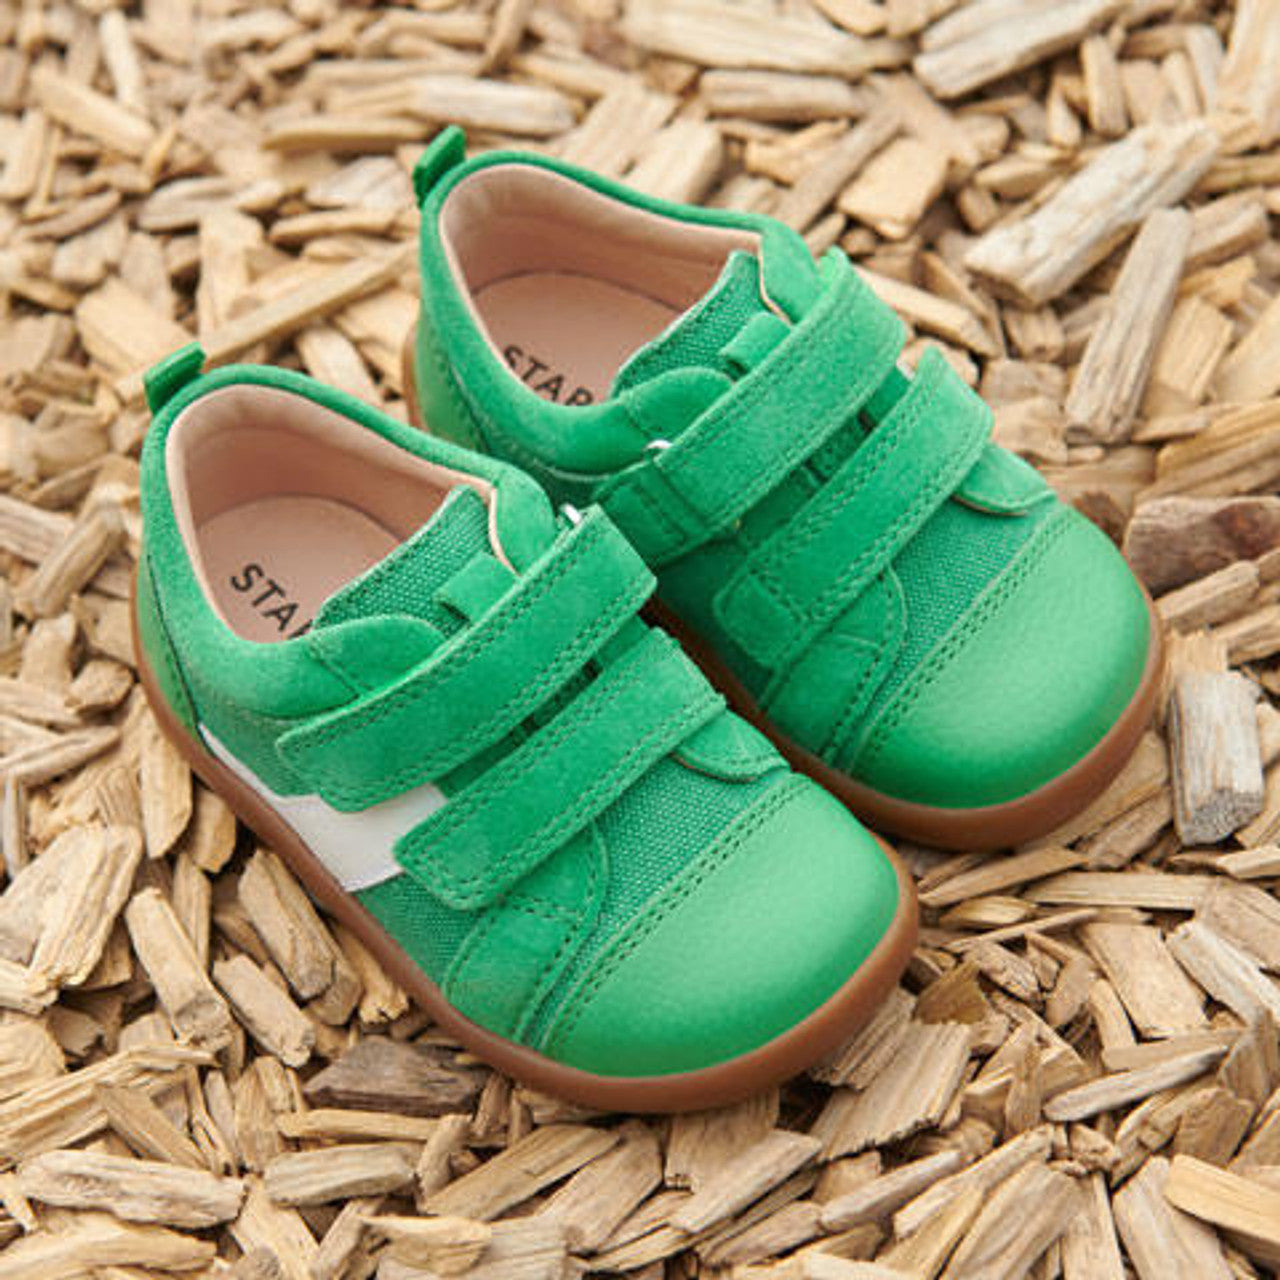 A pair of boys casual shoes by Start Rite, style Maze, in green and white with double velcro fastening. Angled view.